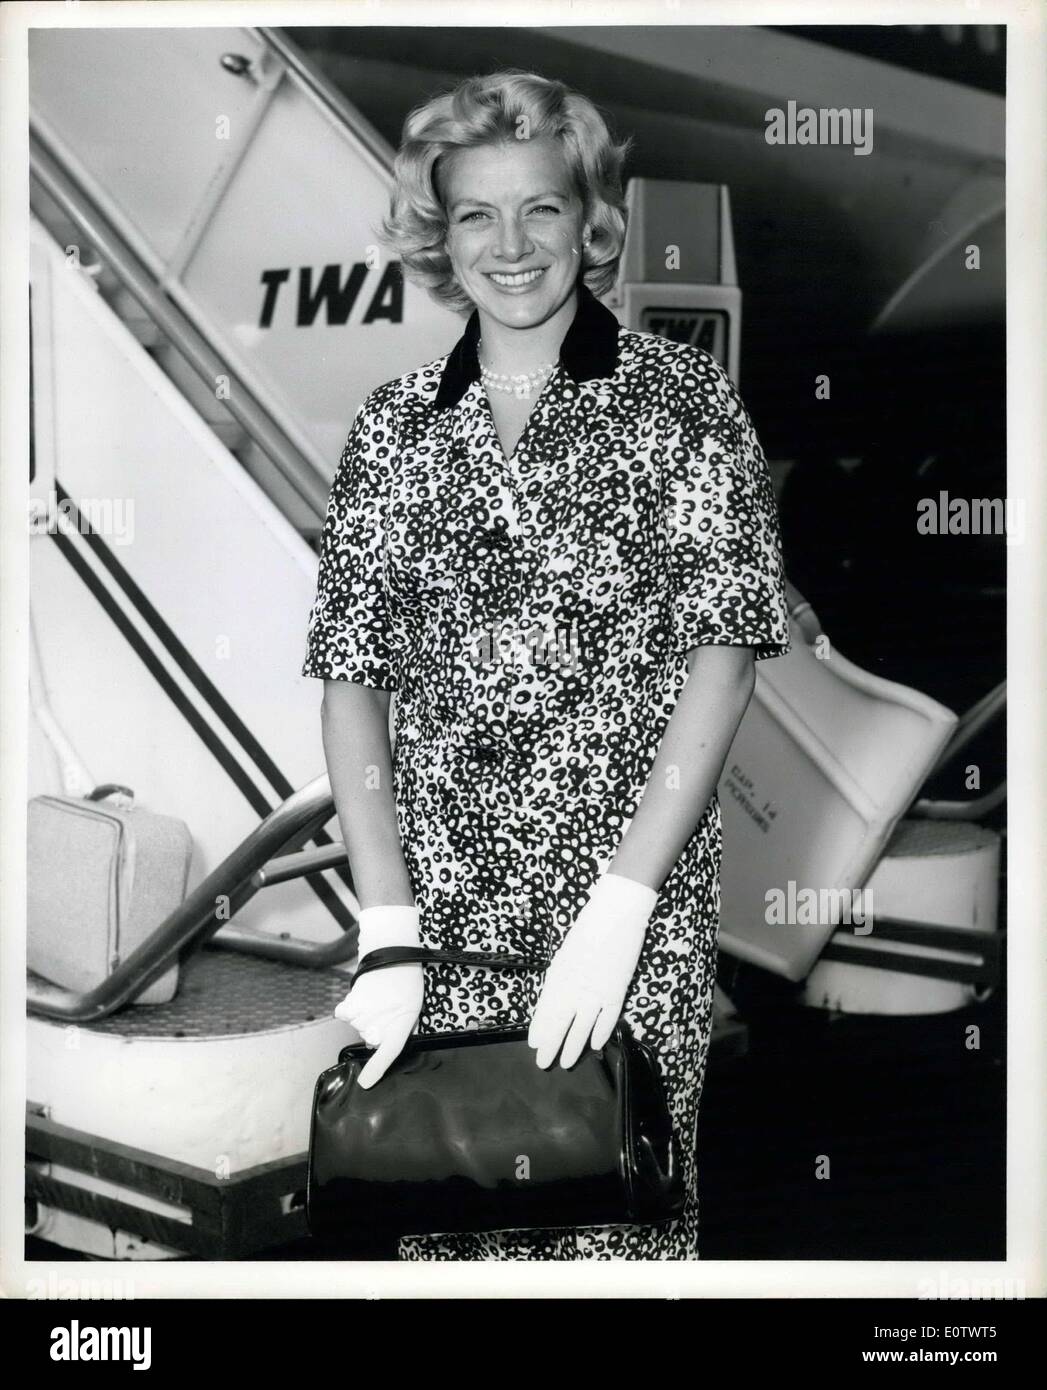 Aug. 16, 1960 - Rosemary Clooney The Popular Songbird On The Wing Again, This Time To Los Angeles, Via TWA The Superjet Airline Stock Photo